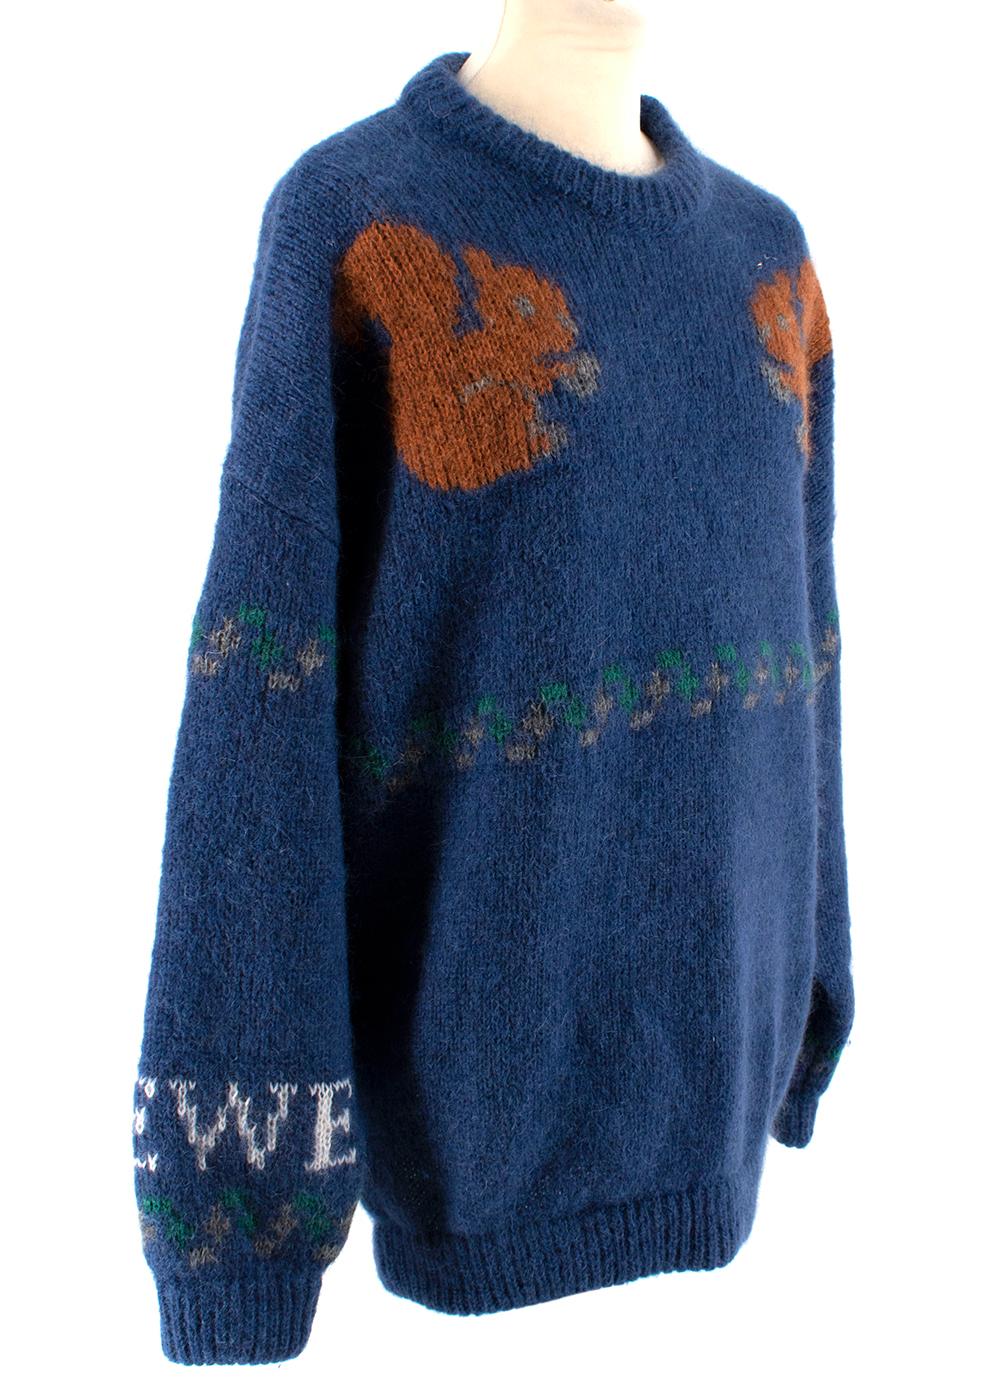 Loewe Blue Squirrel Mohair-blend Knit Sweater

From Loewe 's AW18  this oversized sweater has been spun in Italy from a fuzzy mohair-blend and woven with the house's logo and a trio of squirrels.

Materials:
63% Mohair / 26% Polyamide / 6%